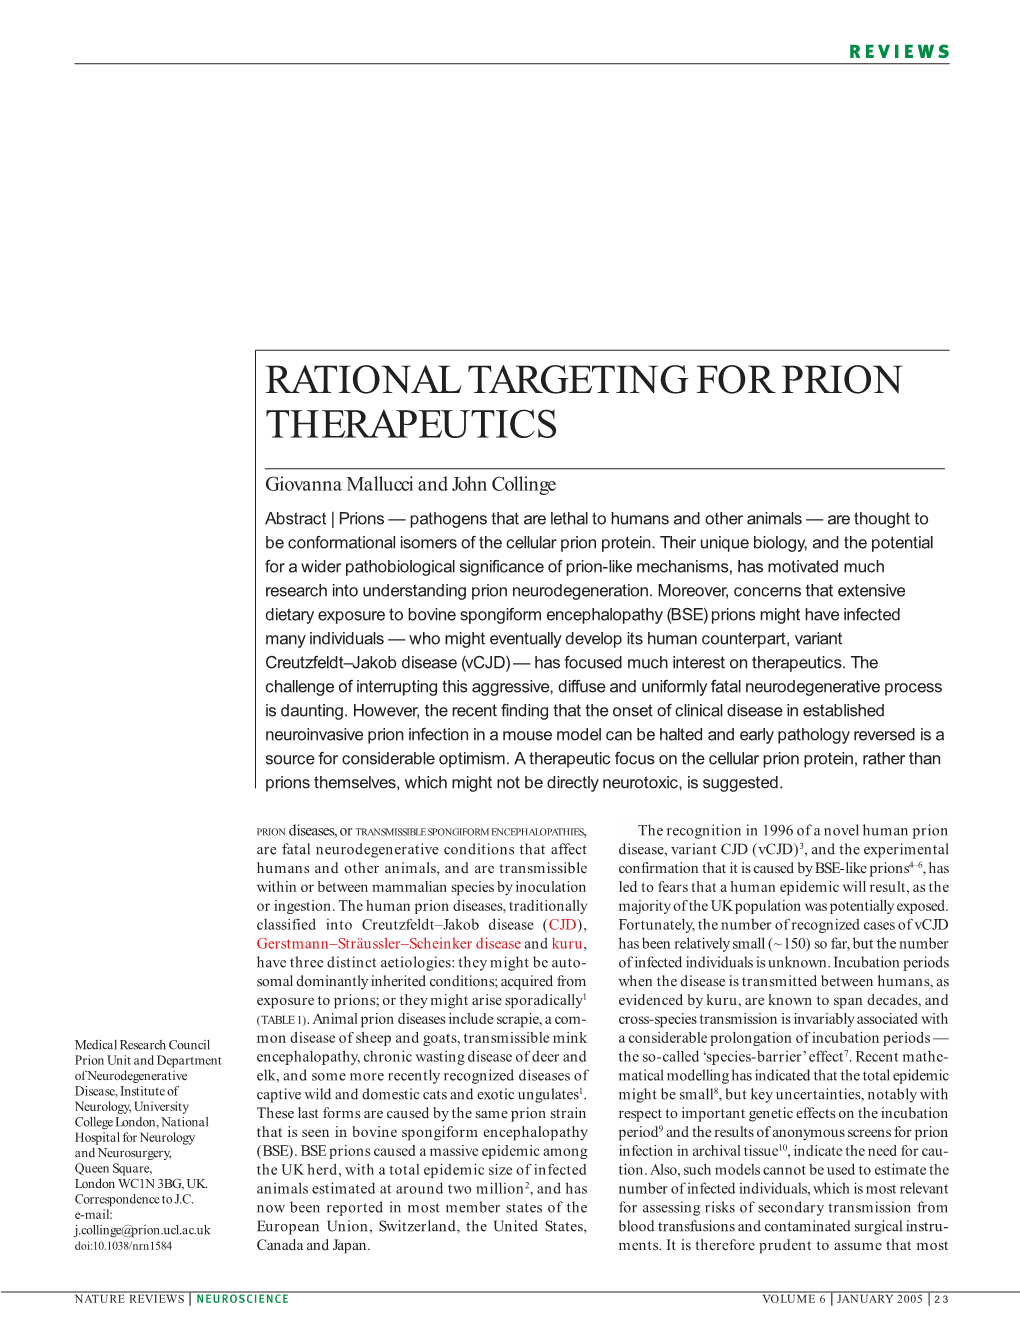 Rational Targeting for Prion Therapeutics